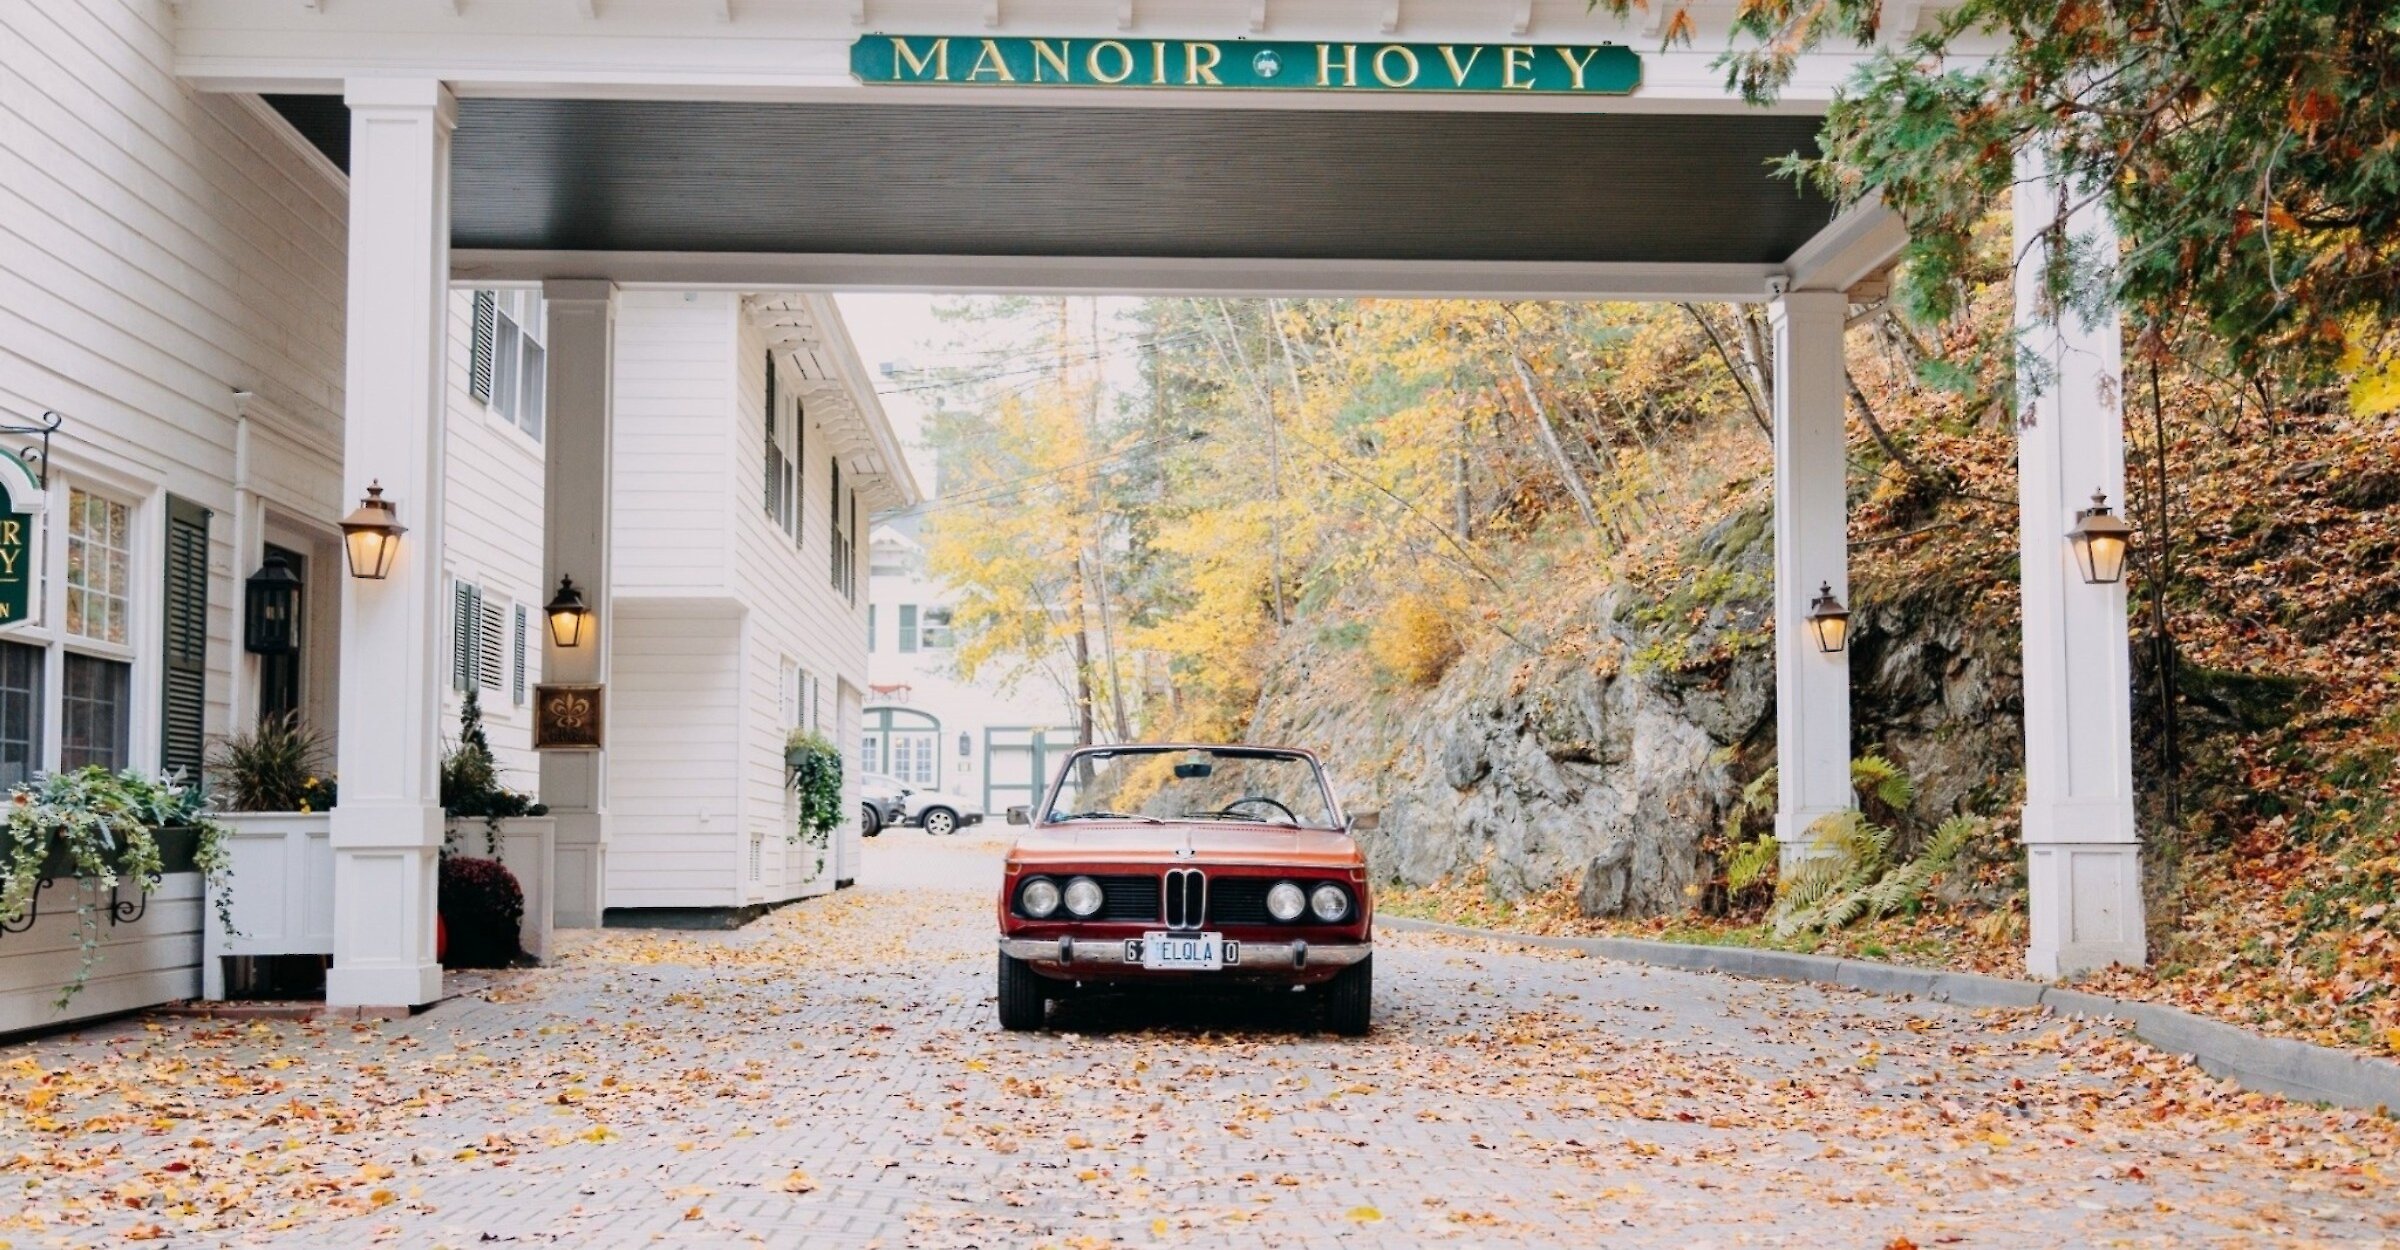 A vintage car at the entrance of the Manoir